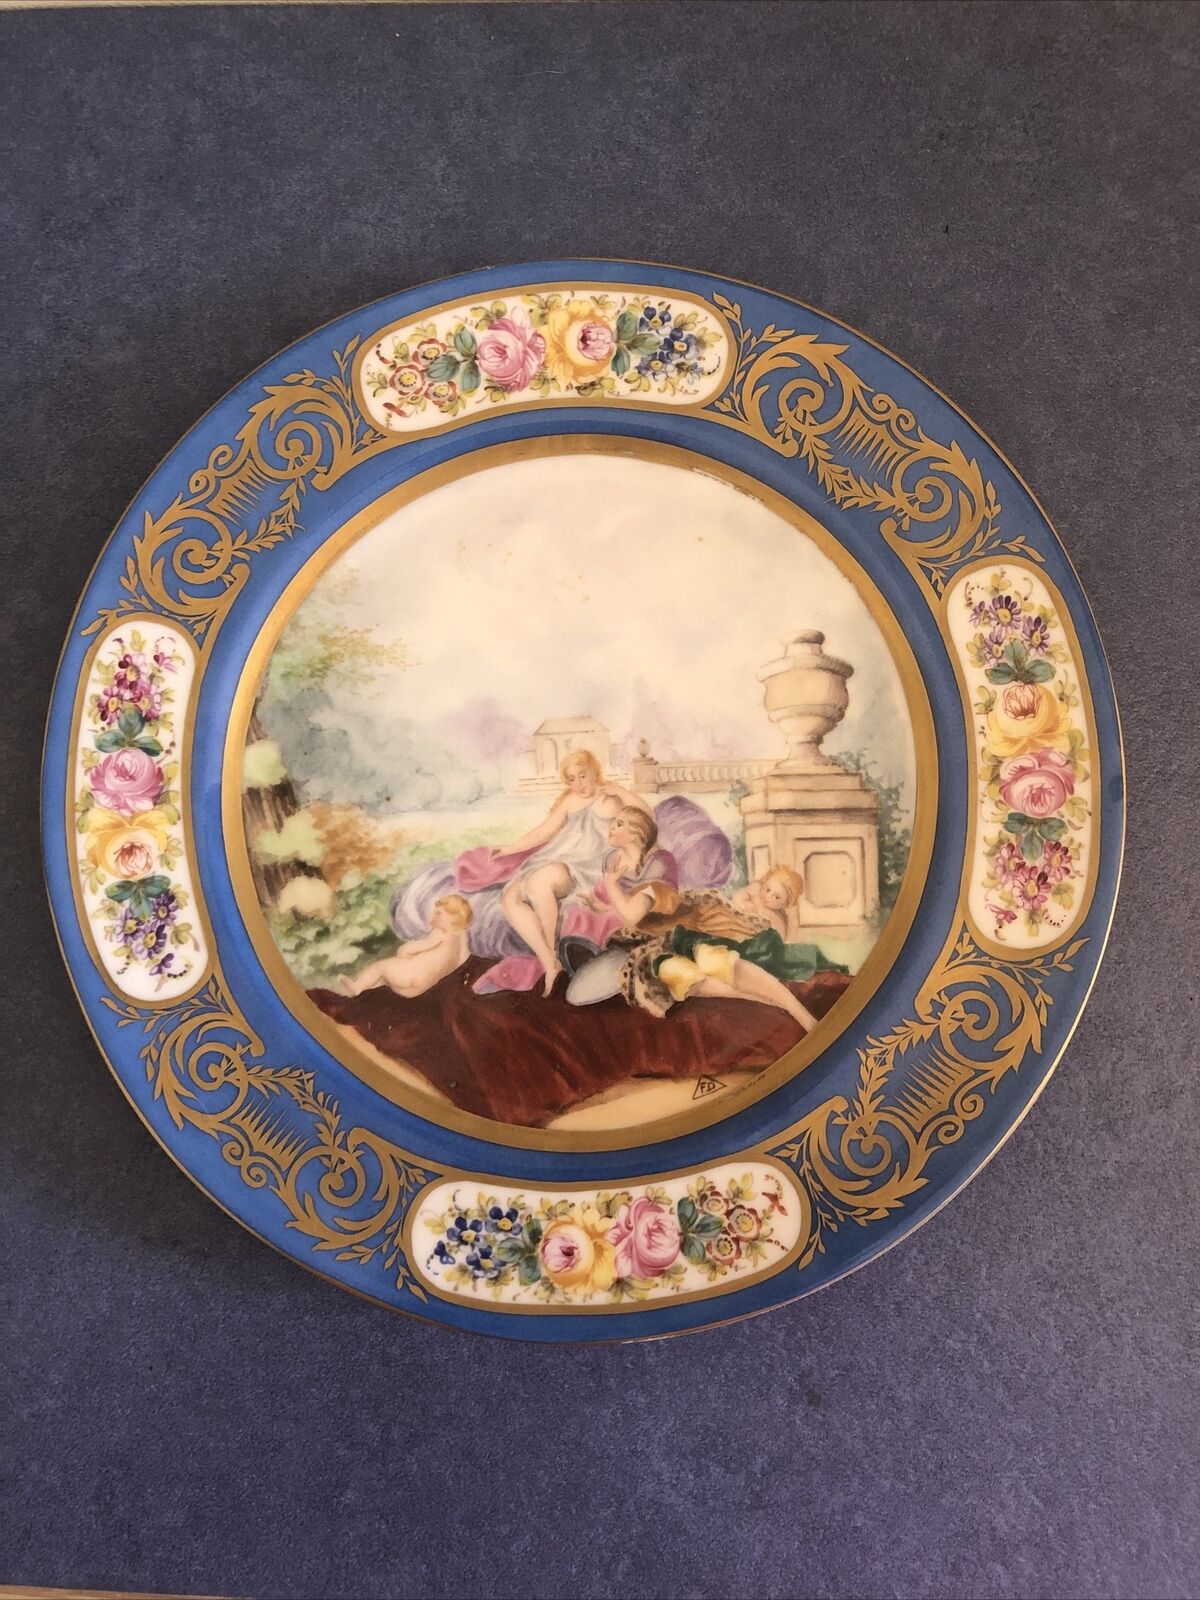 Antique Sevres Hand Painted Cabinet Porcelain Plate, circa 1875, Signed